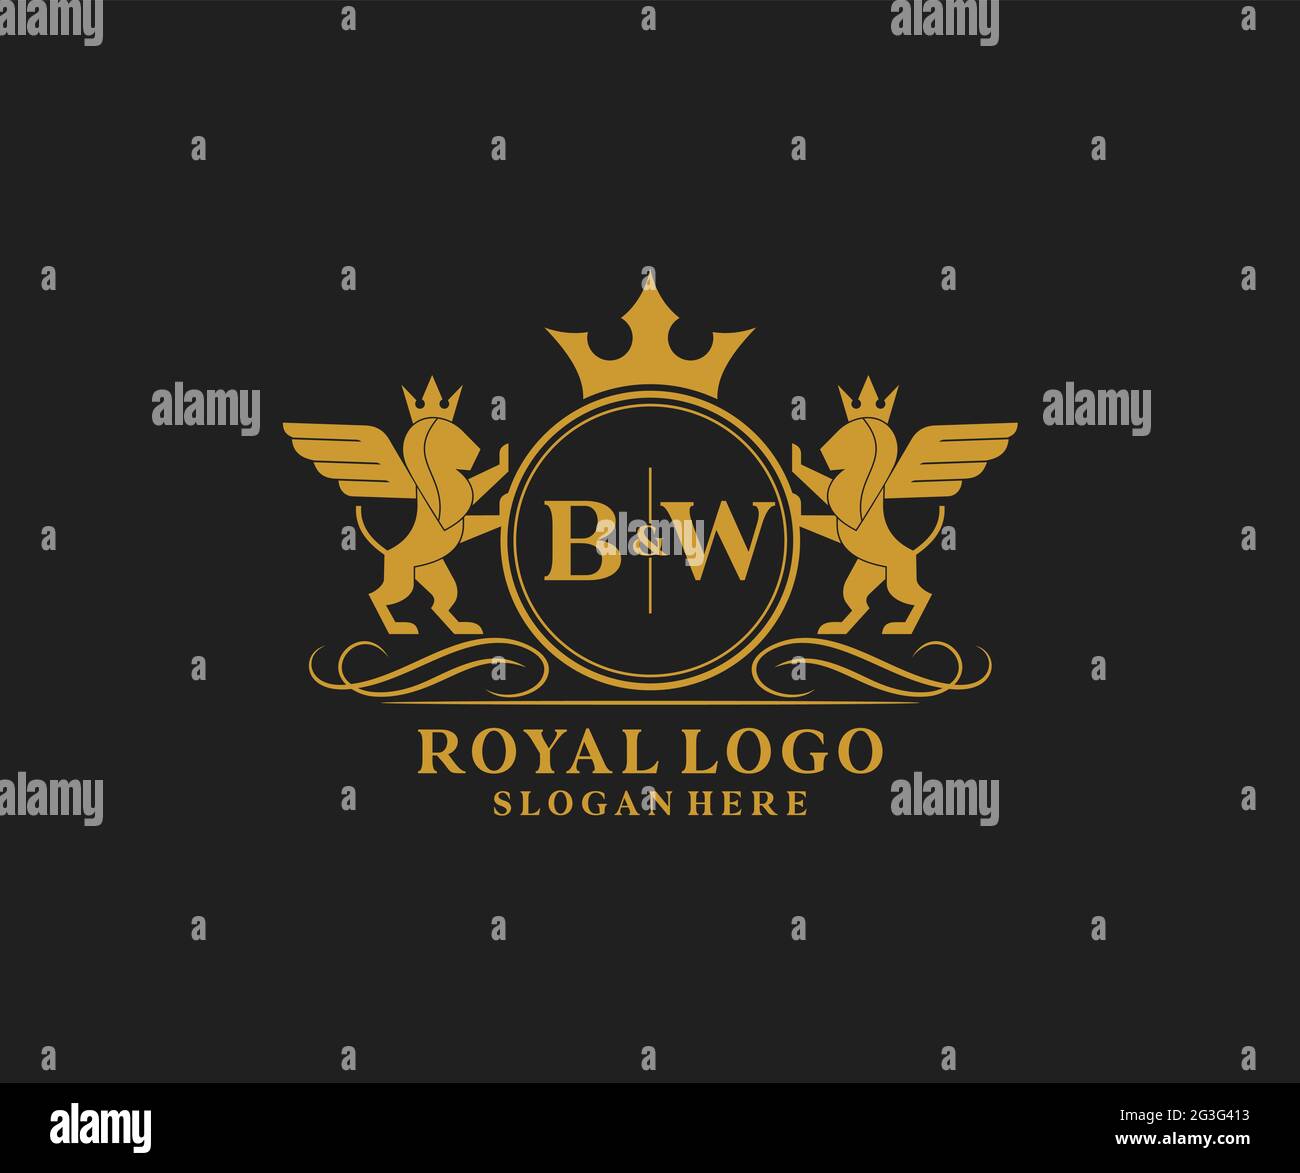 BW Letter Lion Royal Luxury Heraldic,Crest Logo template in vector art for Restaurant, Royalty, Boutique, Cafe, Hotel, Heraldic, Jewelry, Fashion and Stock Vector